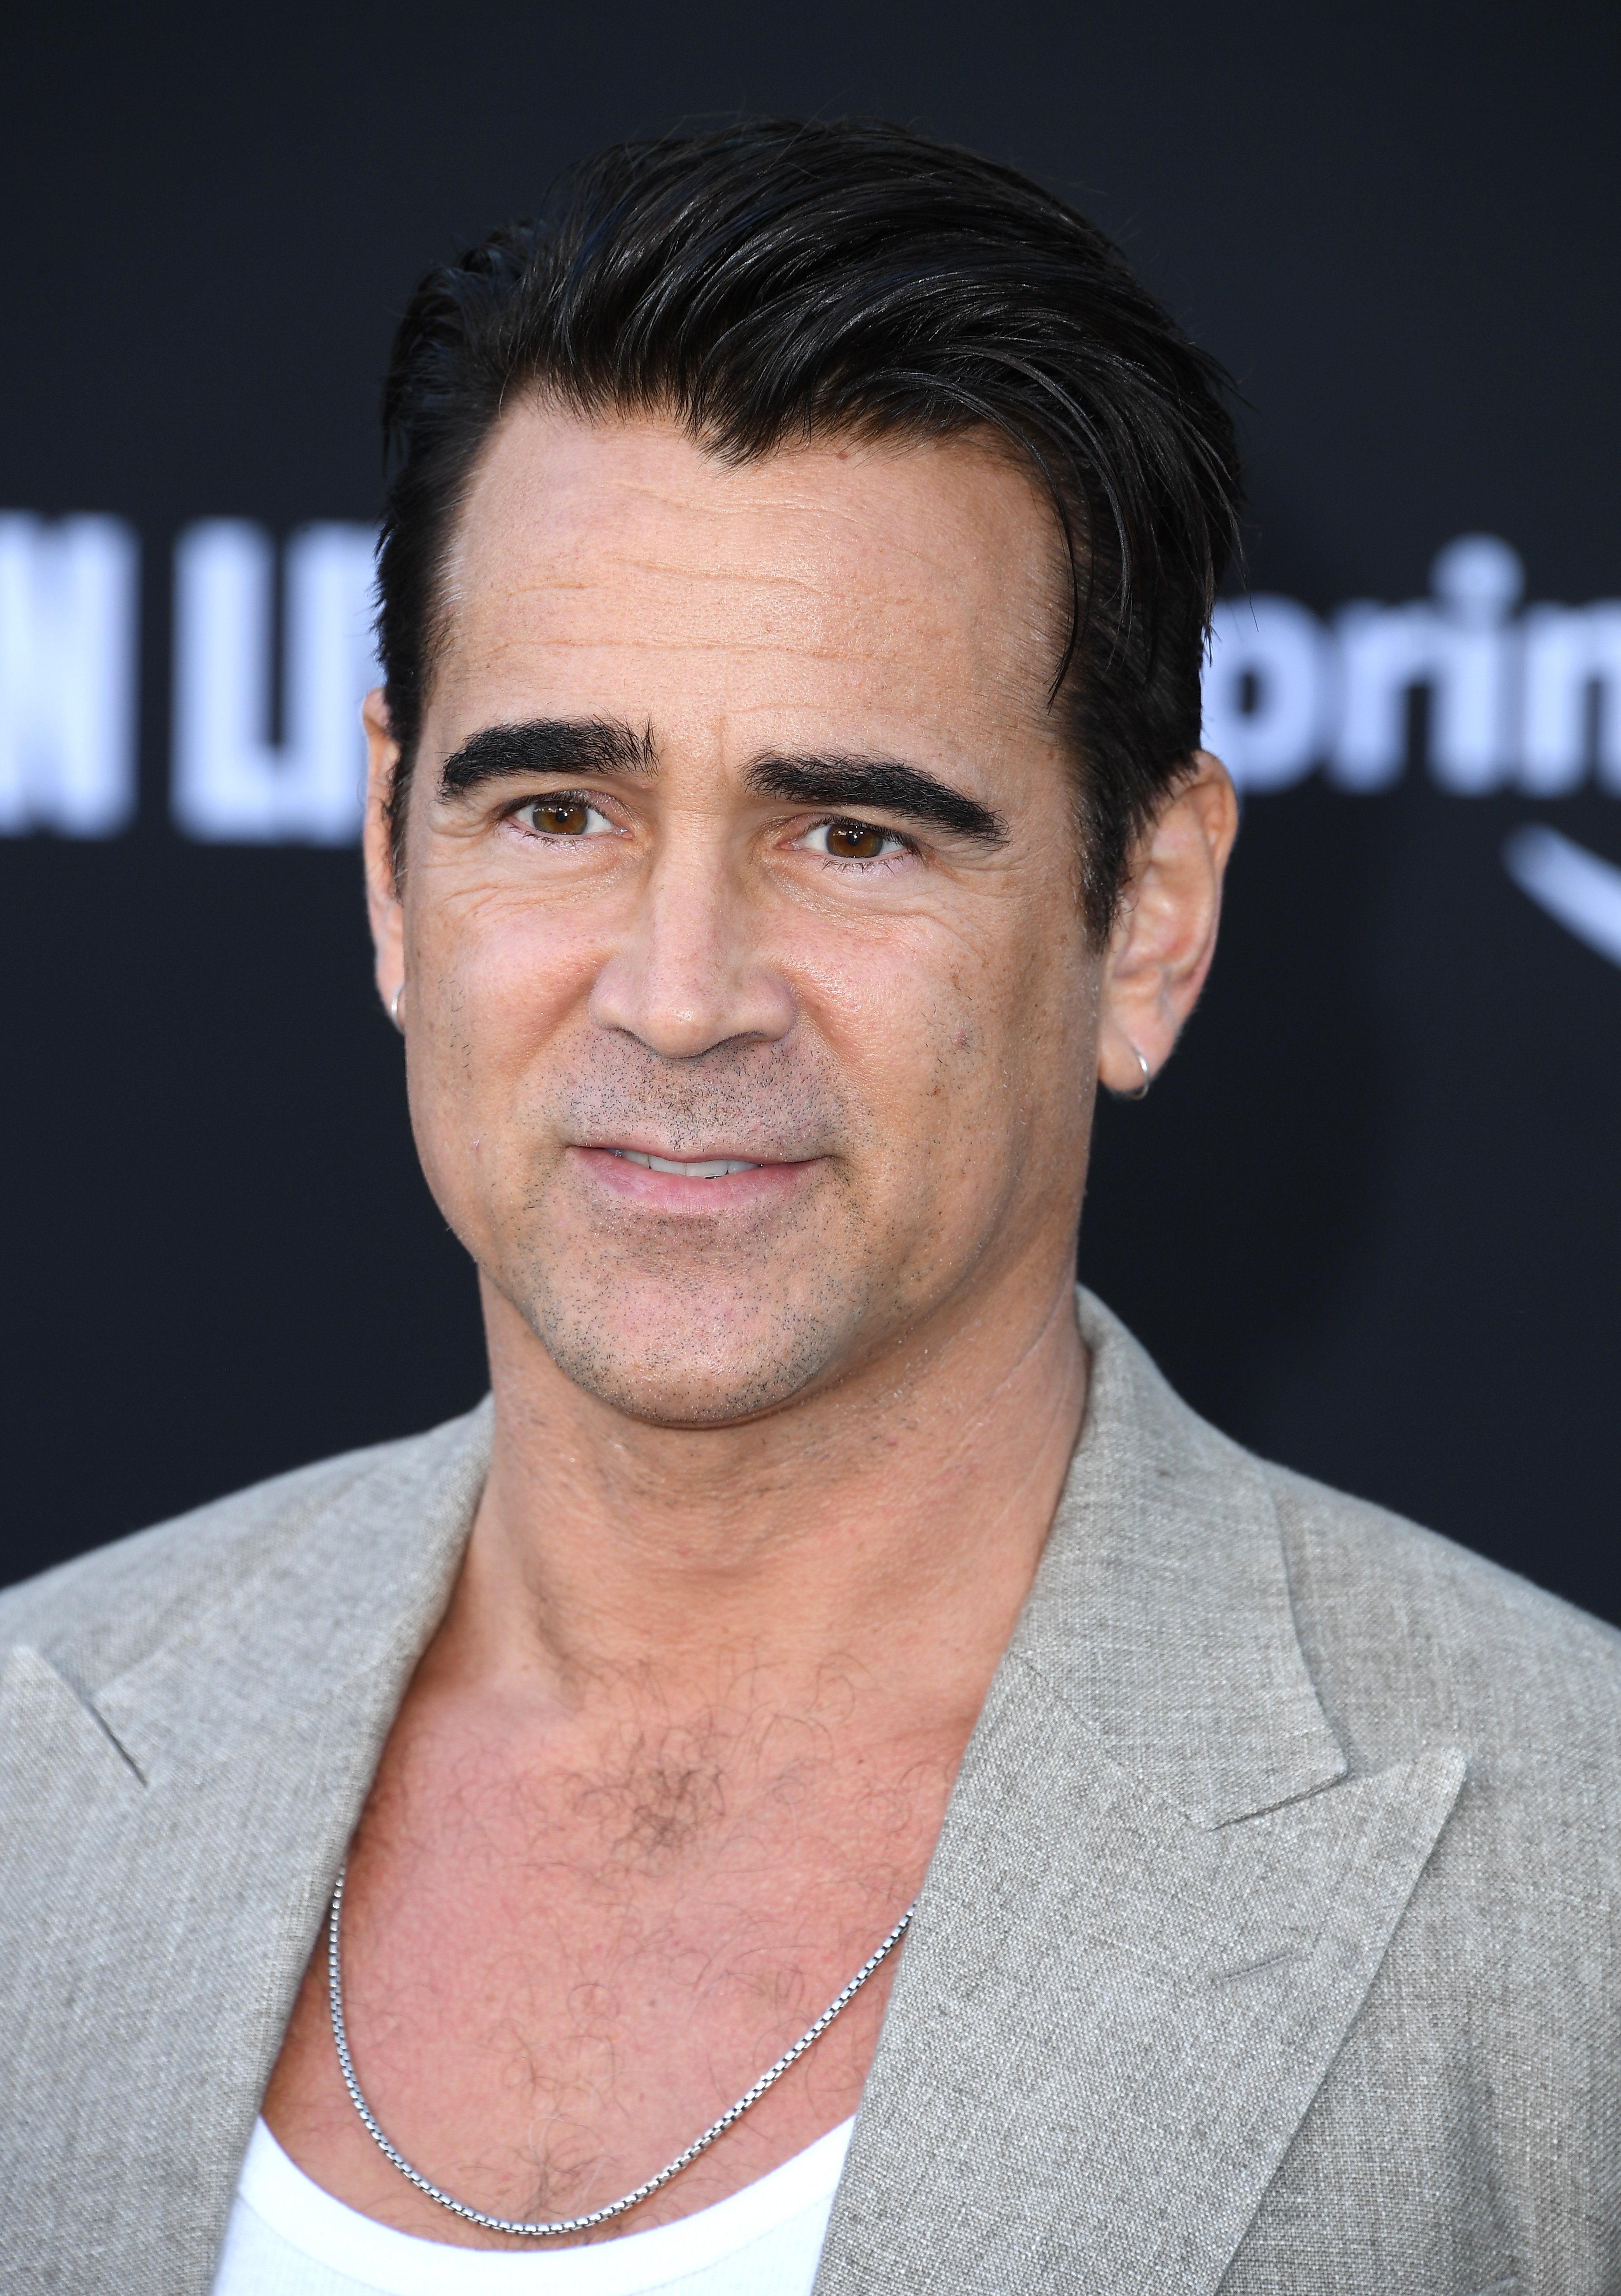 Colin Farrell at the premiere of "Thirteen Lives" at Westwood Village Theater on July 28, 2022, in Los Angeles, California | Source: Getty Image